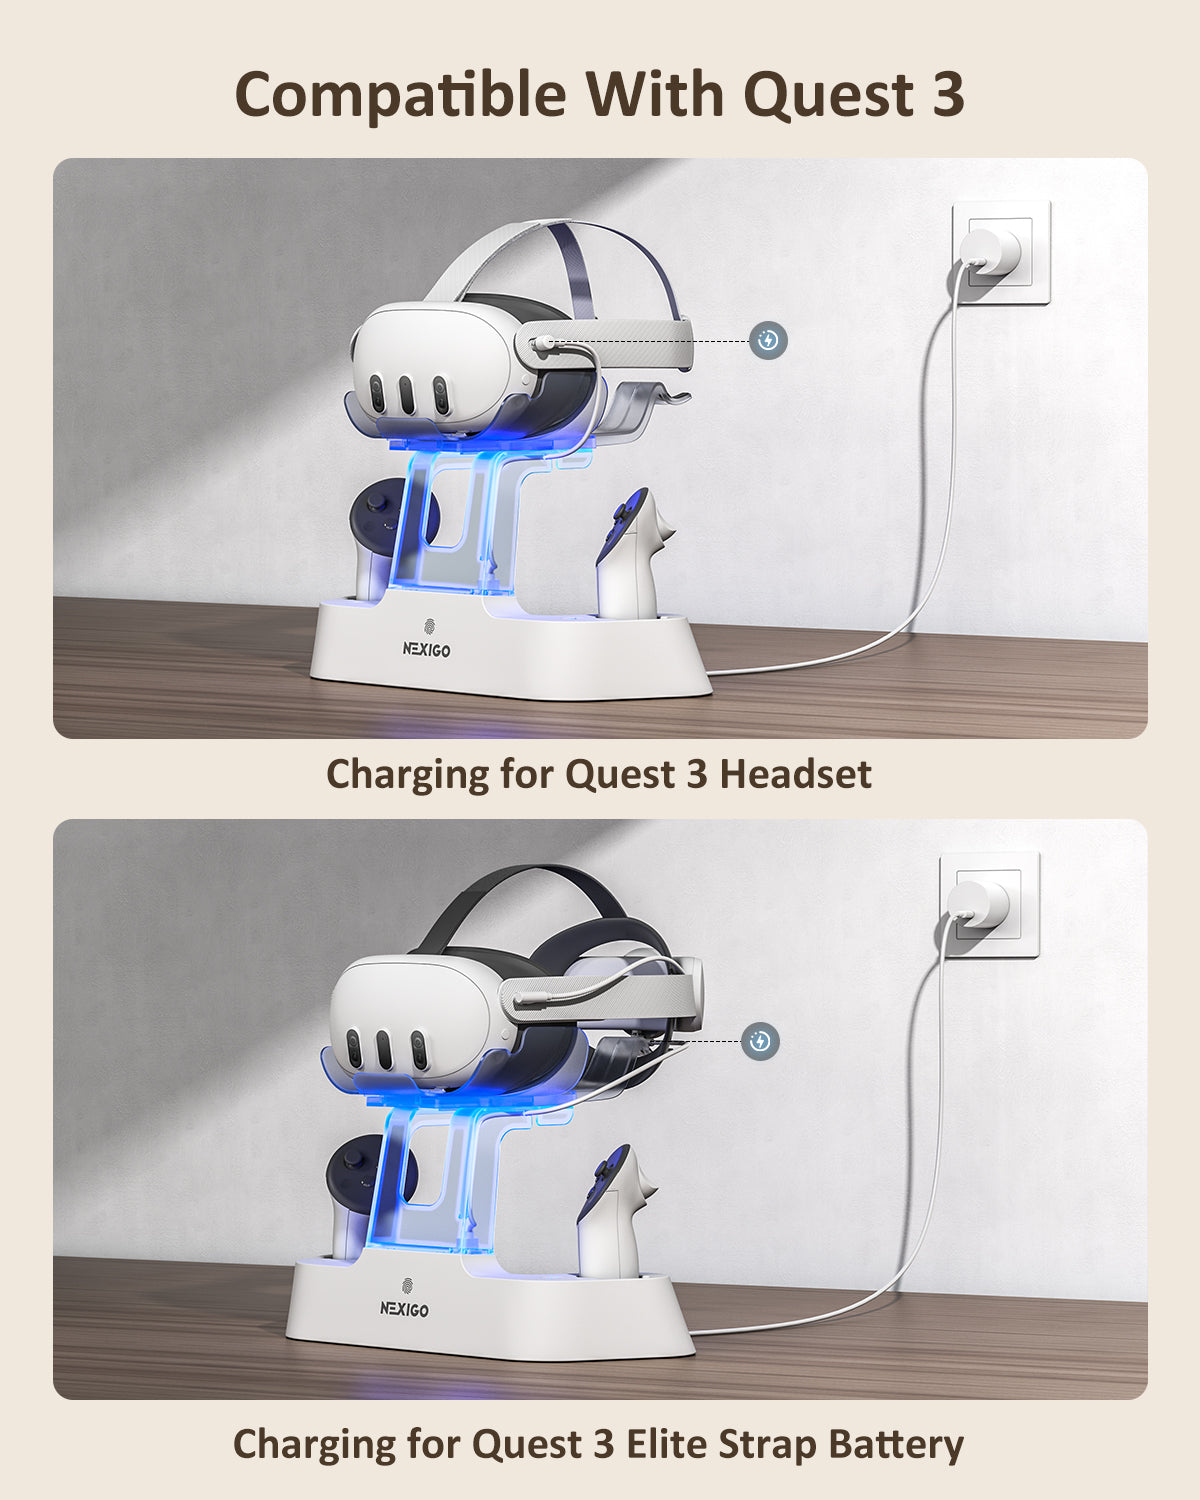 The charging dock is charging for the Quest 3 Headset and the Quest 3 Elite Strap Battery.